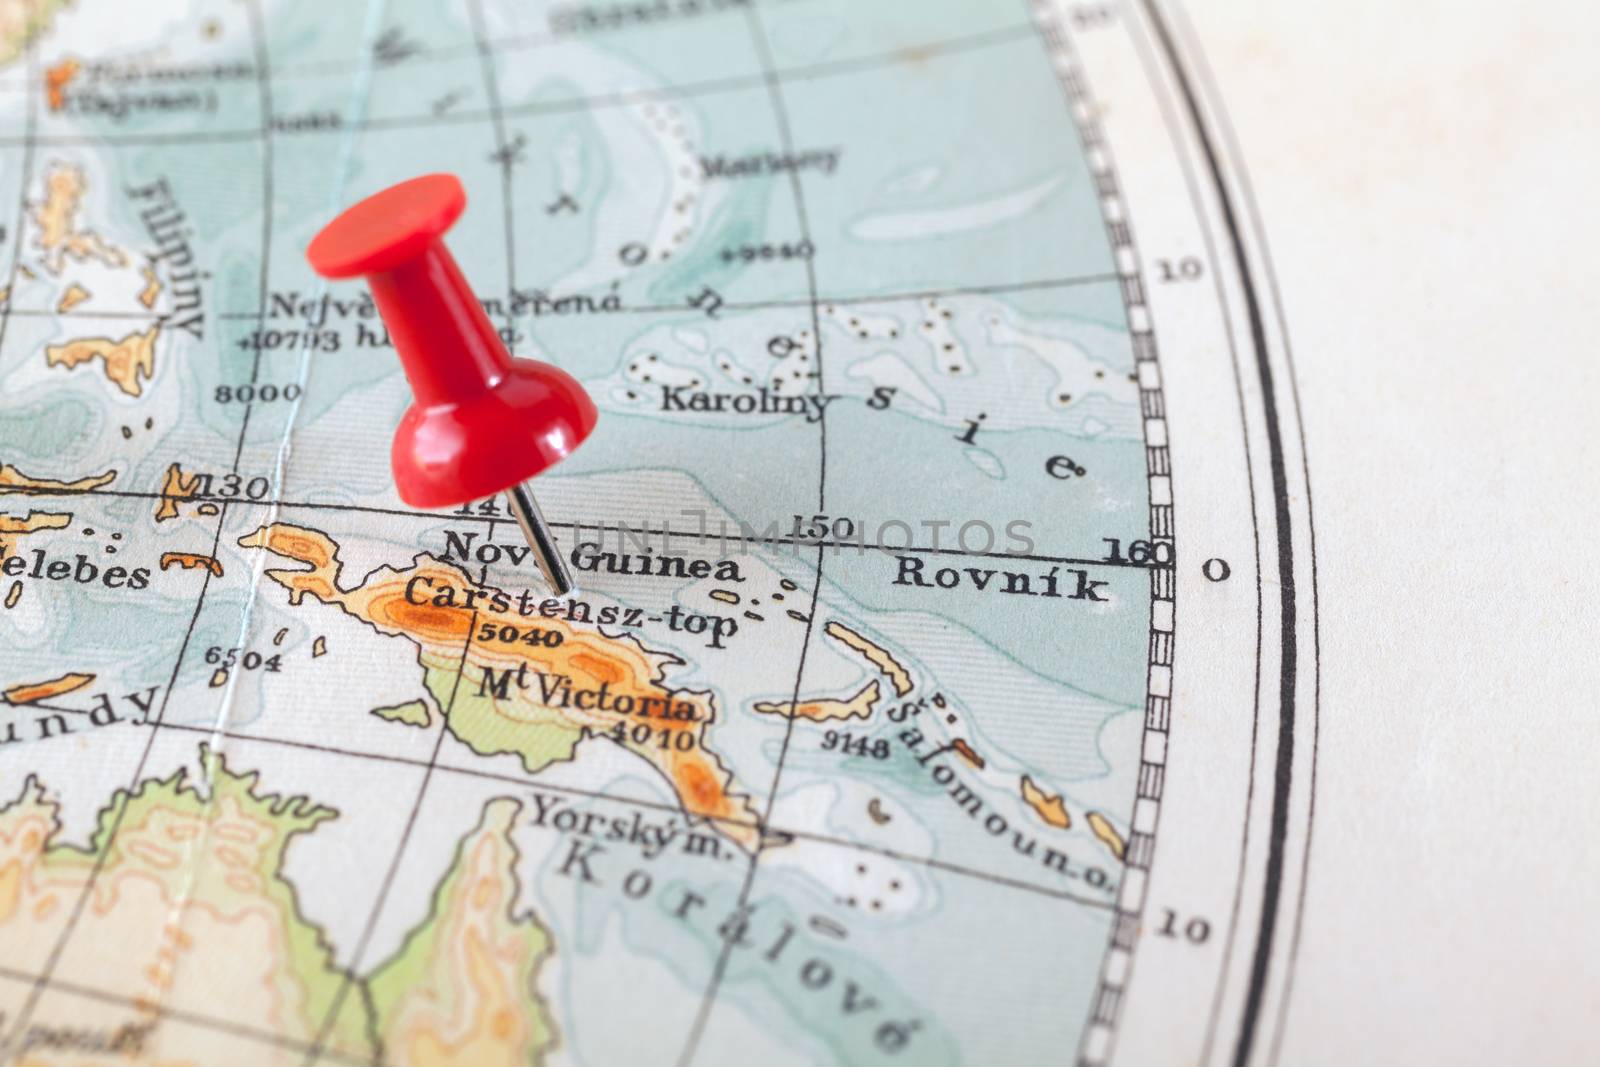 Red push pin showing the location of a destination point on a map. New Guinea